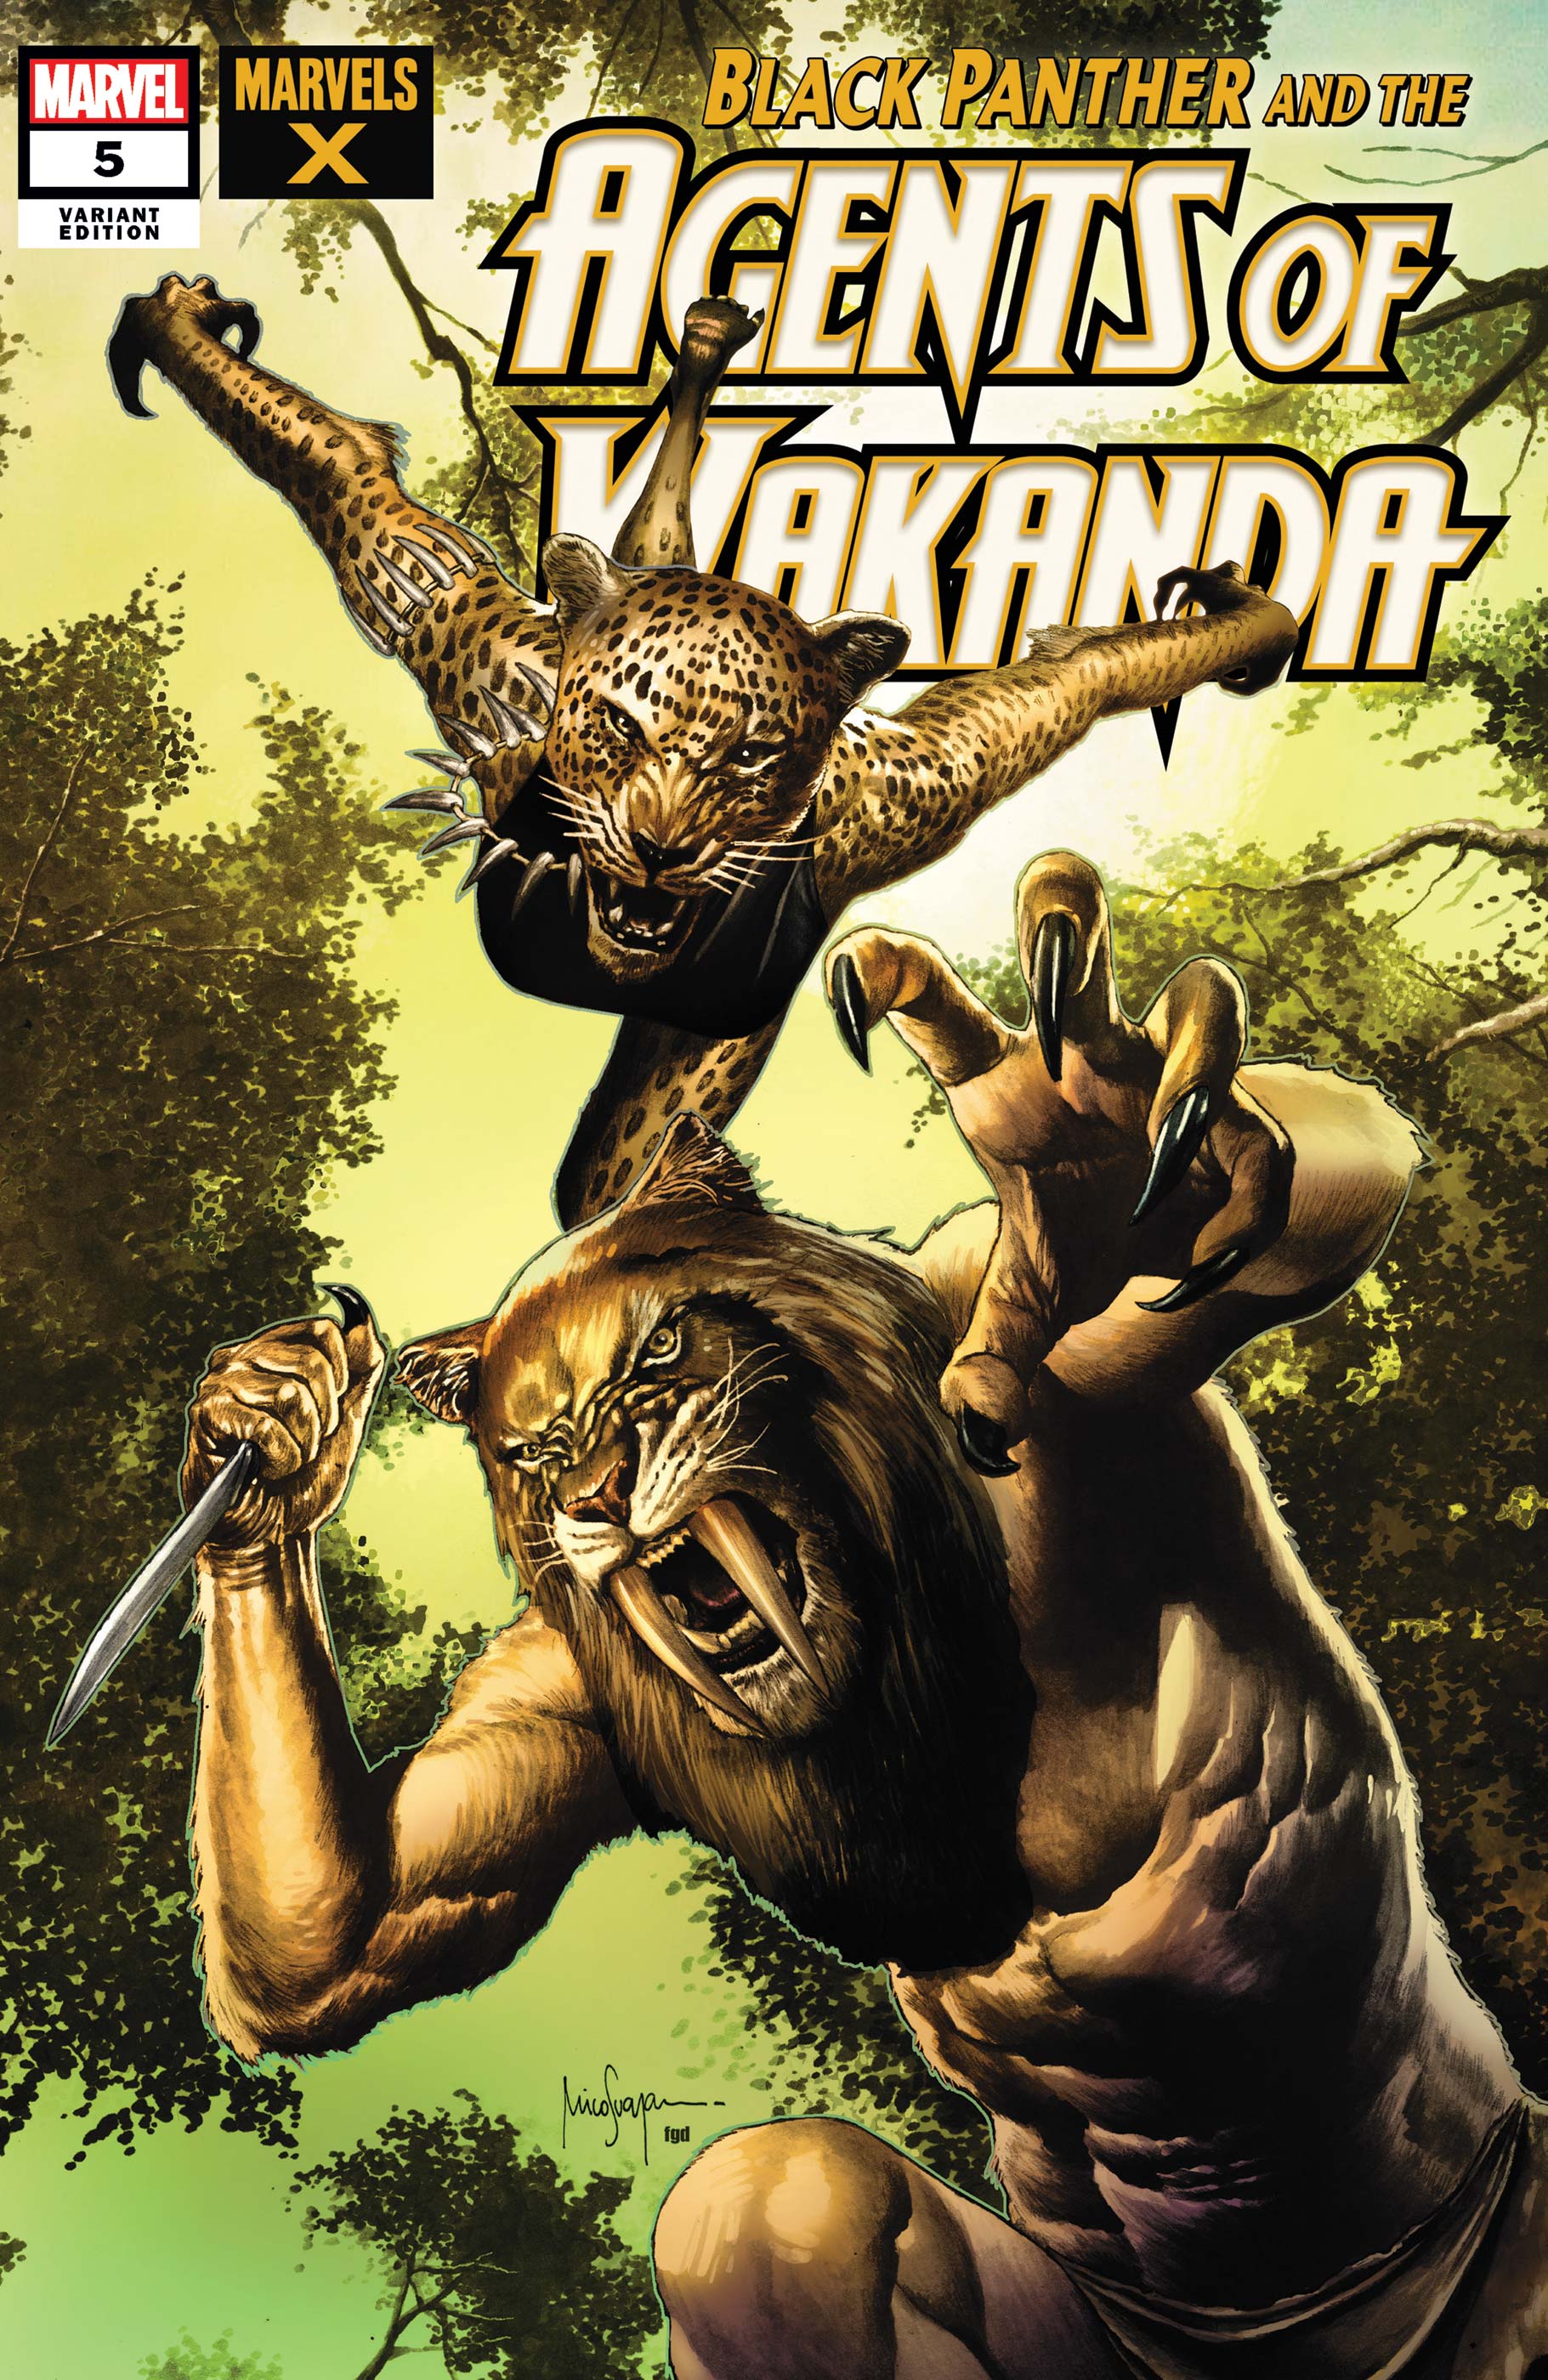 Black Panther and the Agents of Wakanda (2019) #5 (Variant)